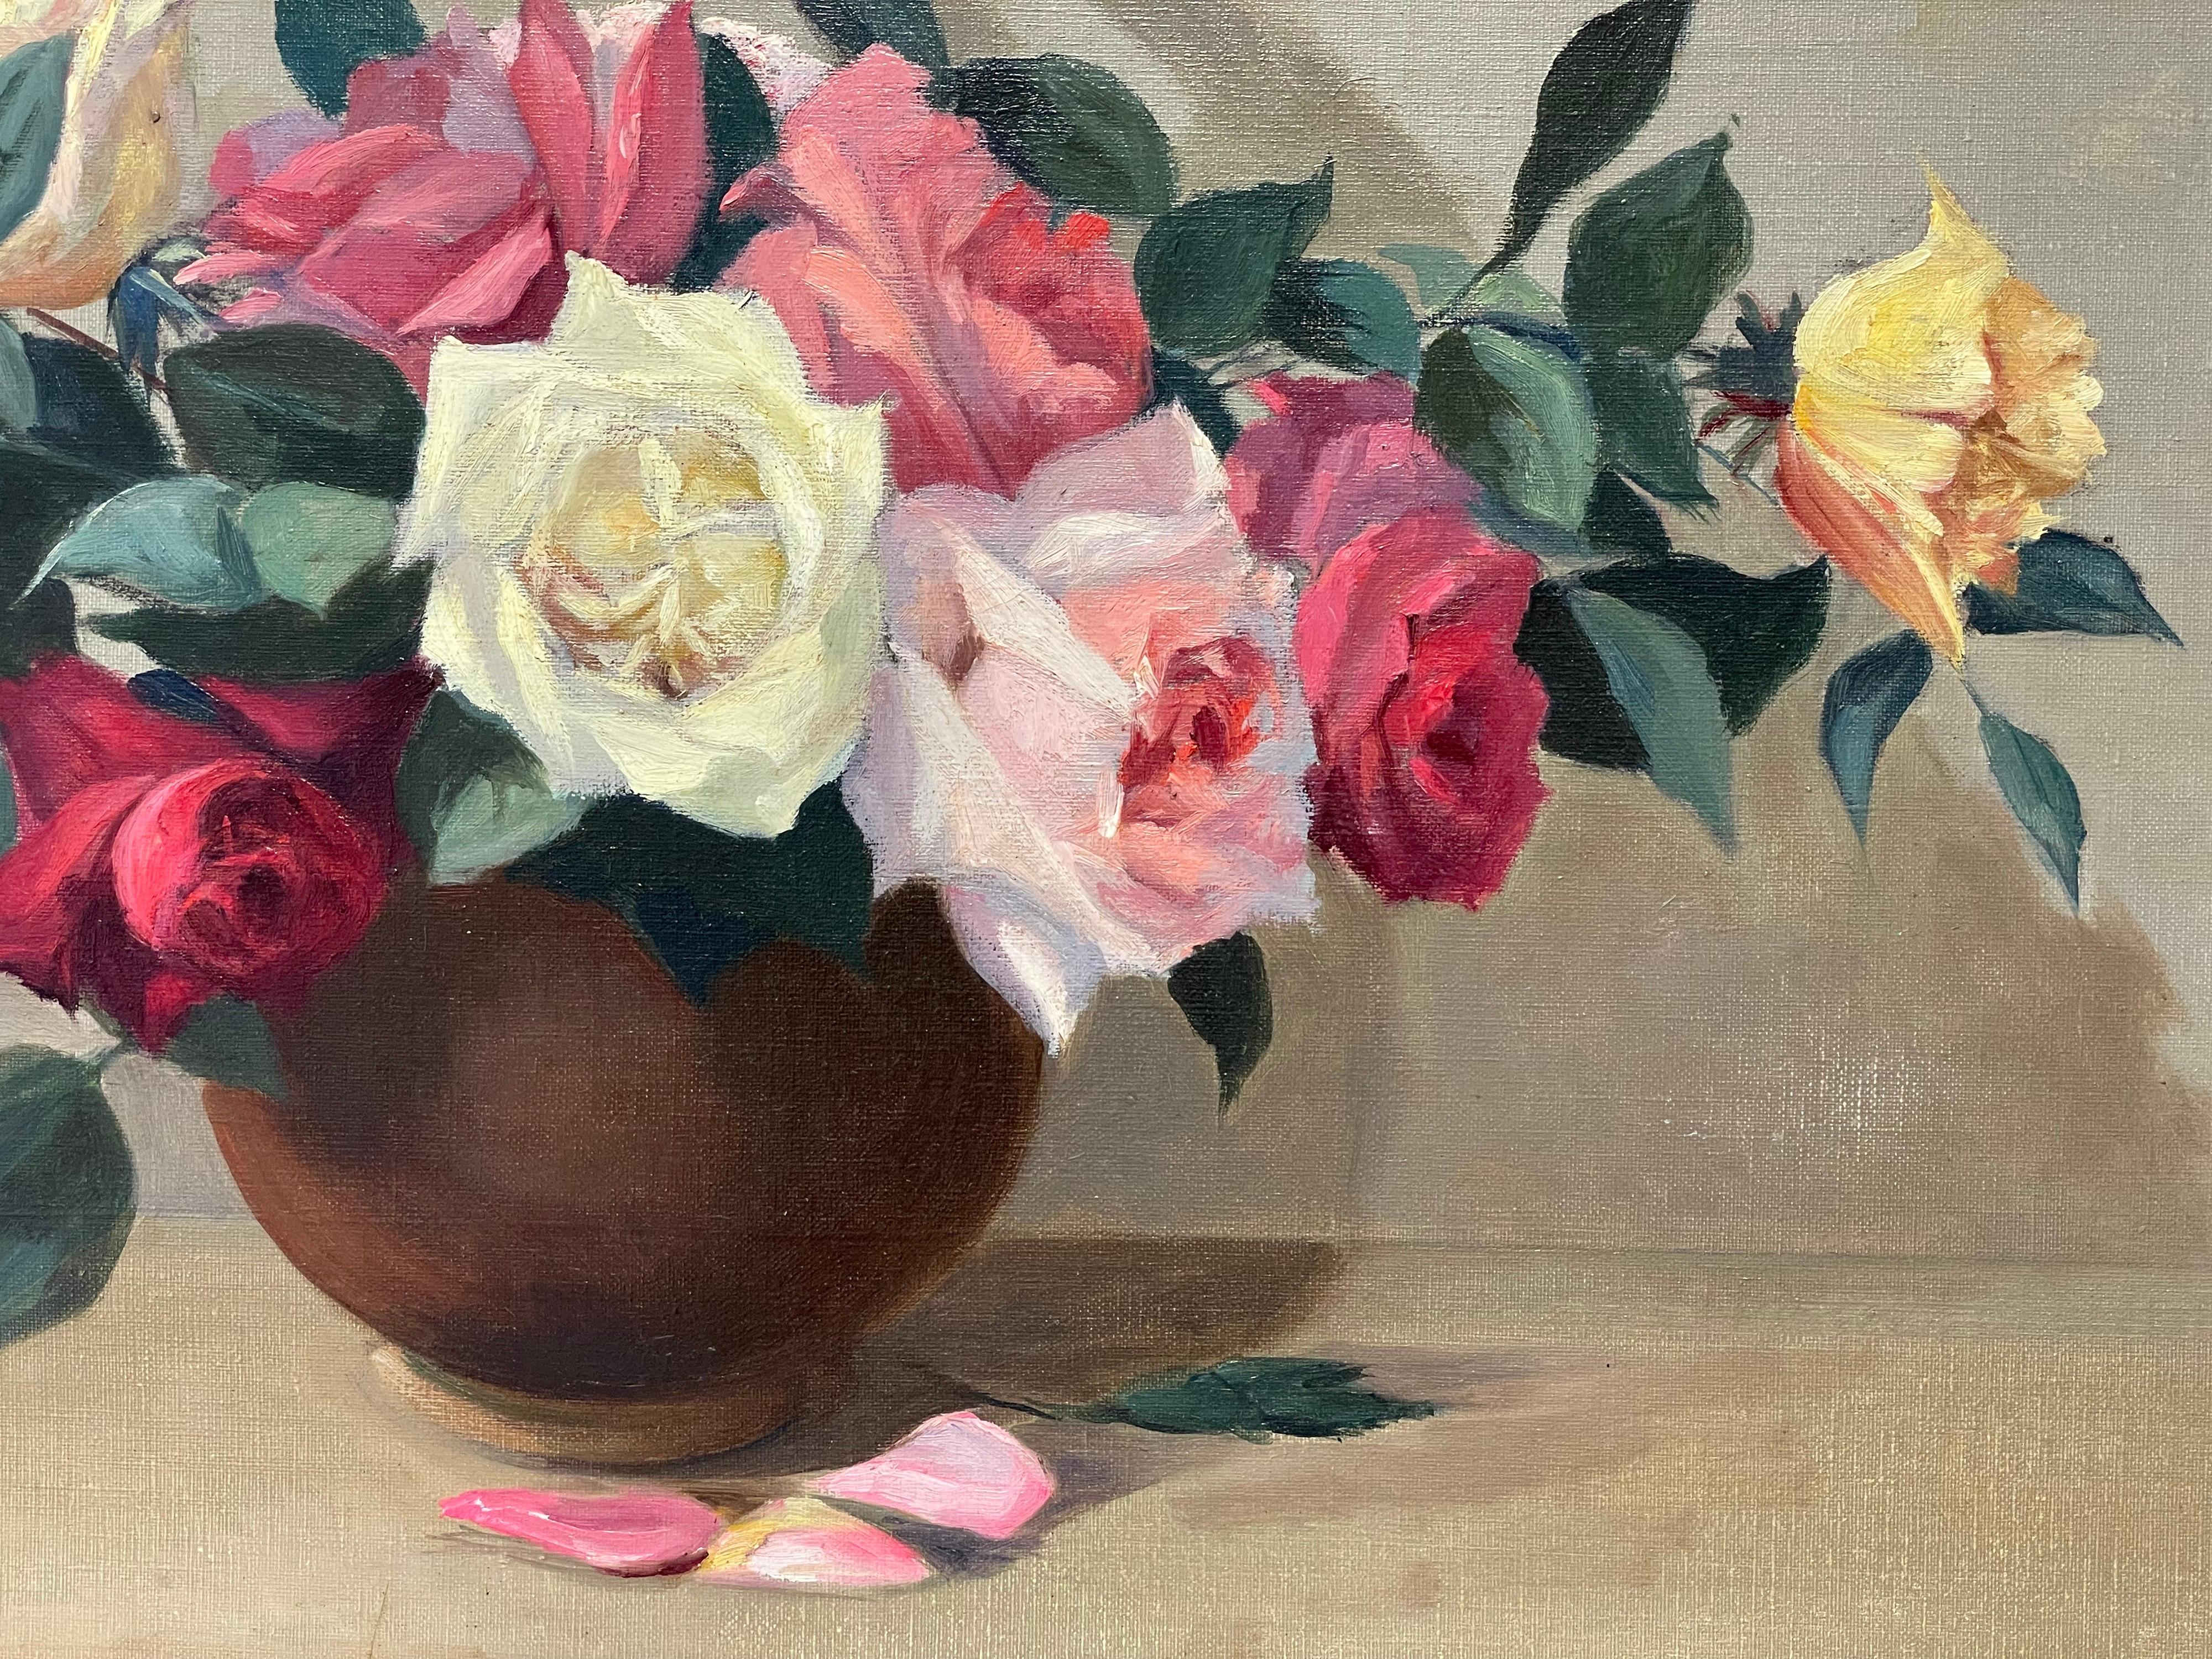 Still Life of Roses in a Bowl
French School, circa 1960's
signed, 'G. Pernet'
oil painting on canvas, framed
canvas: 18 x 32 inches
framed: 23.5 x 37.5 inches
provenance: private collection, France
condition: very good

Beautifully crisply detailed